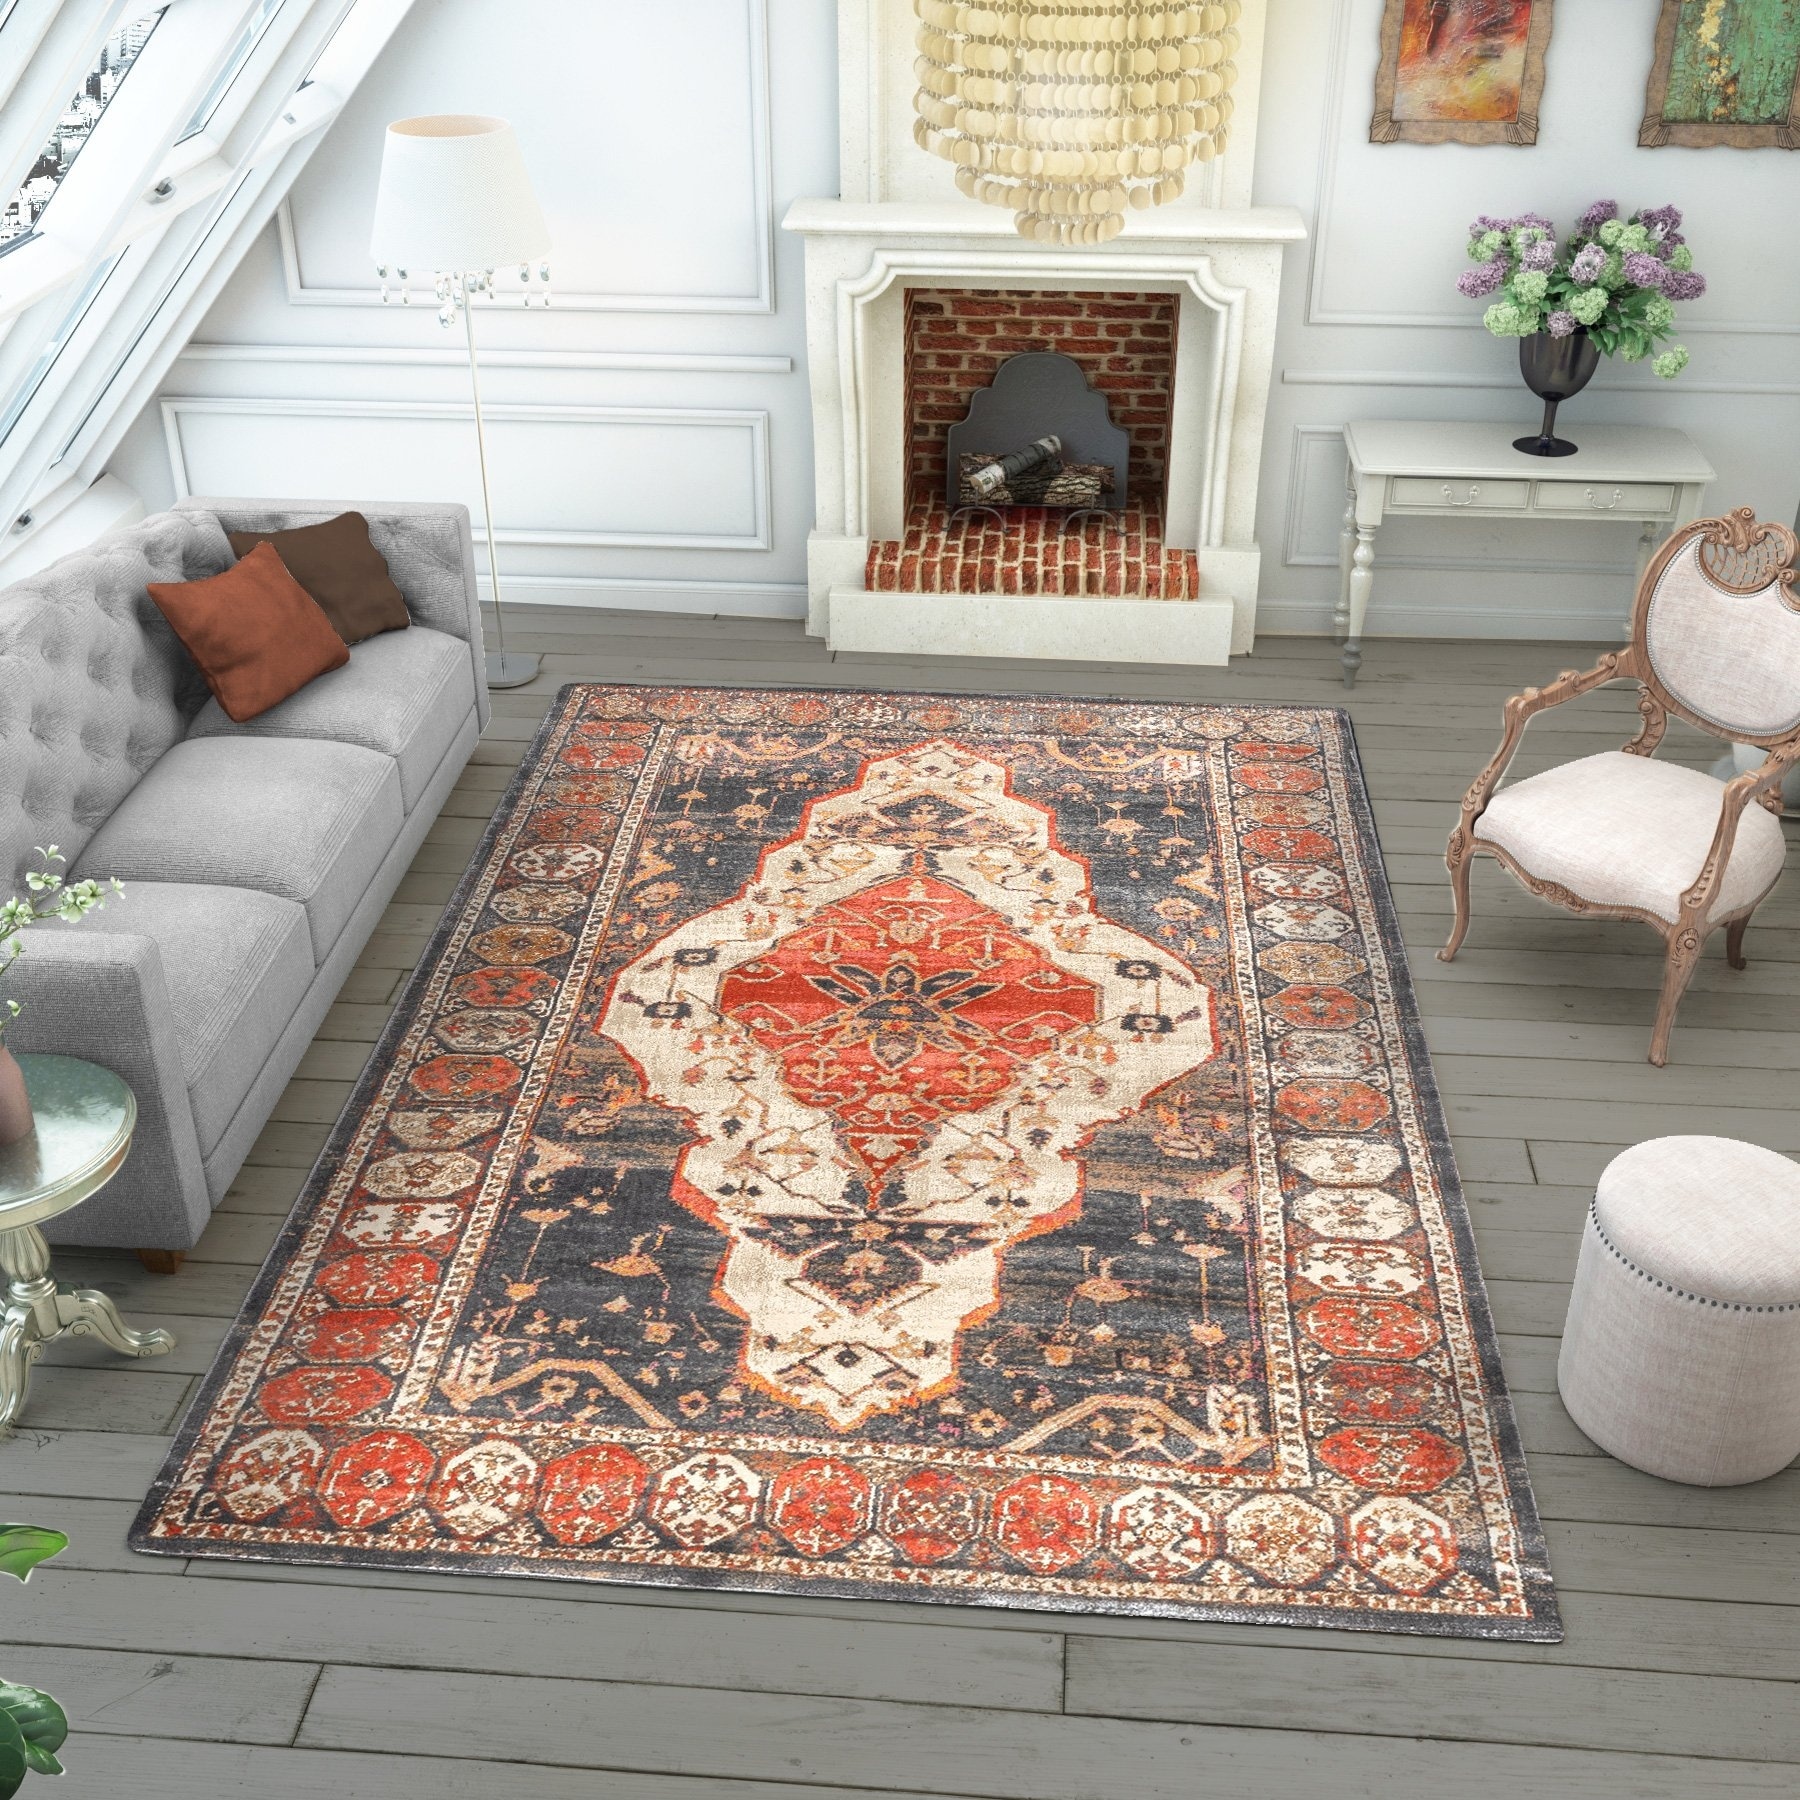 https://ak1.ostkcdn.com/images/products/is/images/direct/b5882f9c89d6ec0e82894ceab20641c9e8e253d5/Rugs2Go-Persian-Culture-Multicolor-Meshkan-Oriental-Heatseat-Polypropylene-Easy-care-High-Density-Egyptian-Indoor-Area-Rug.jpg